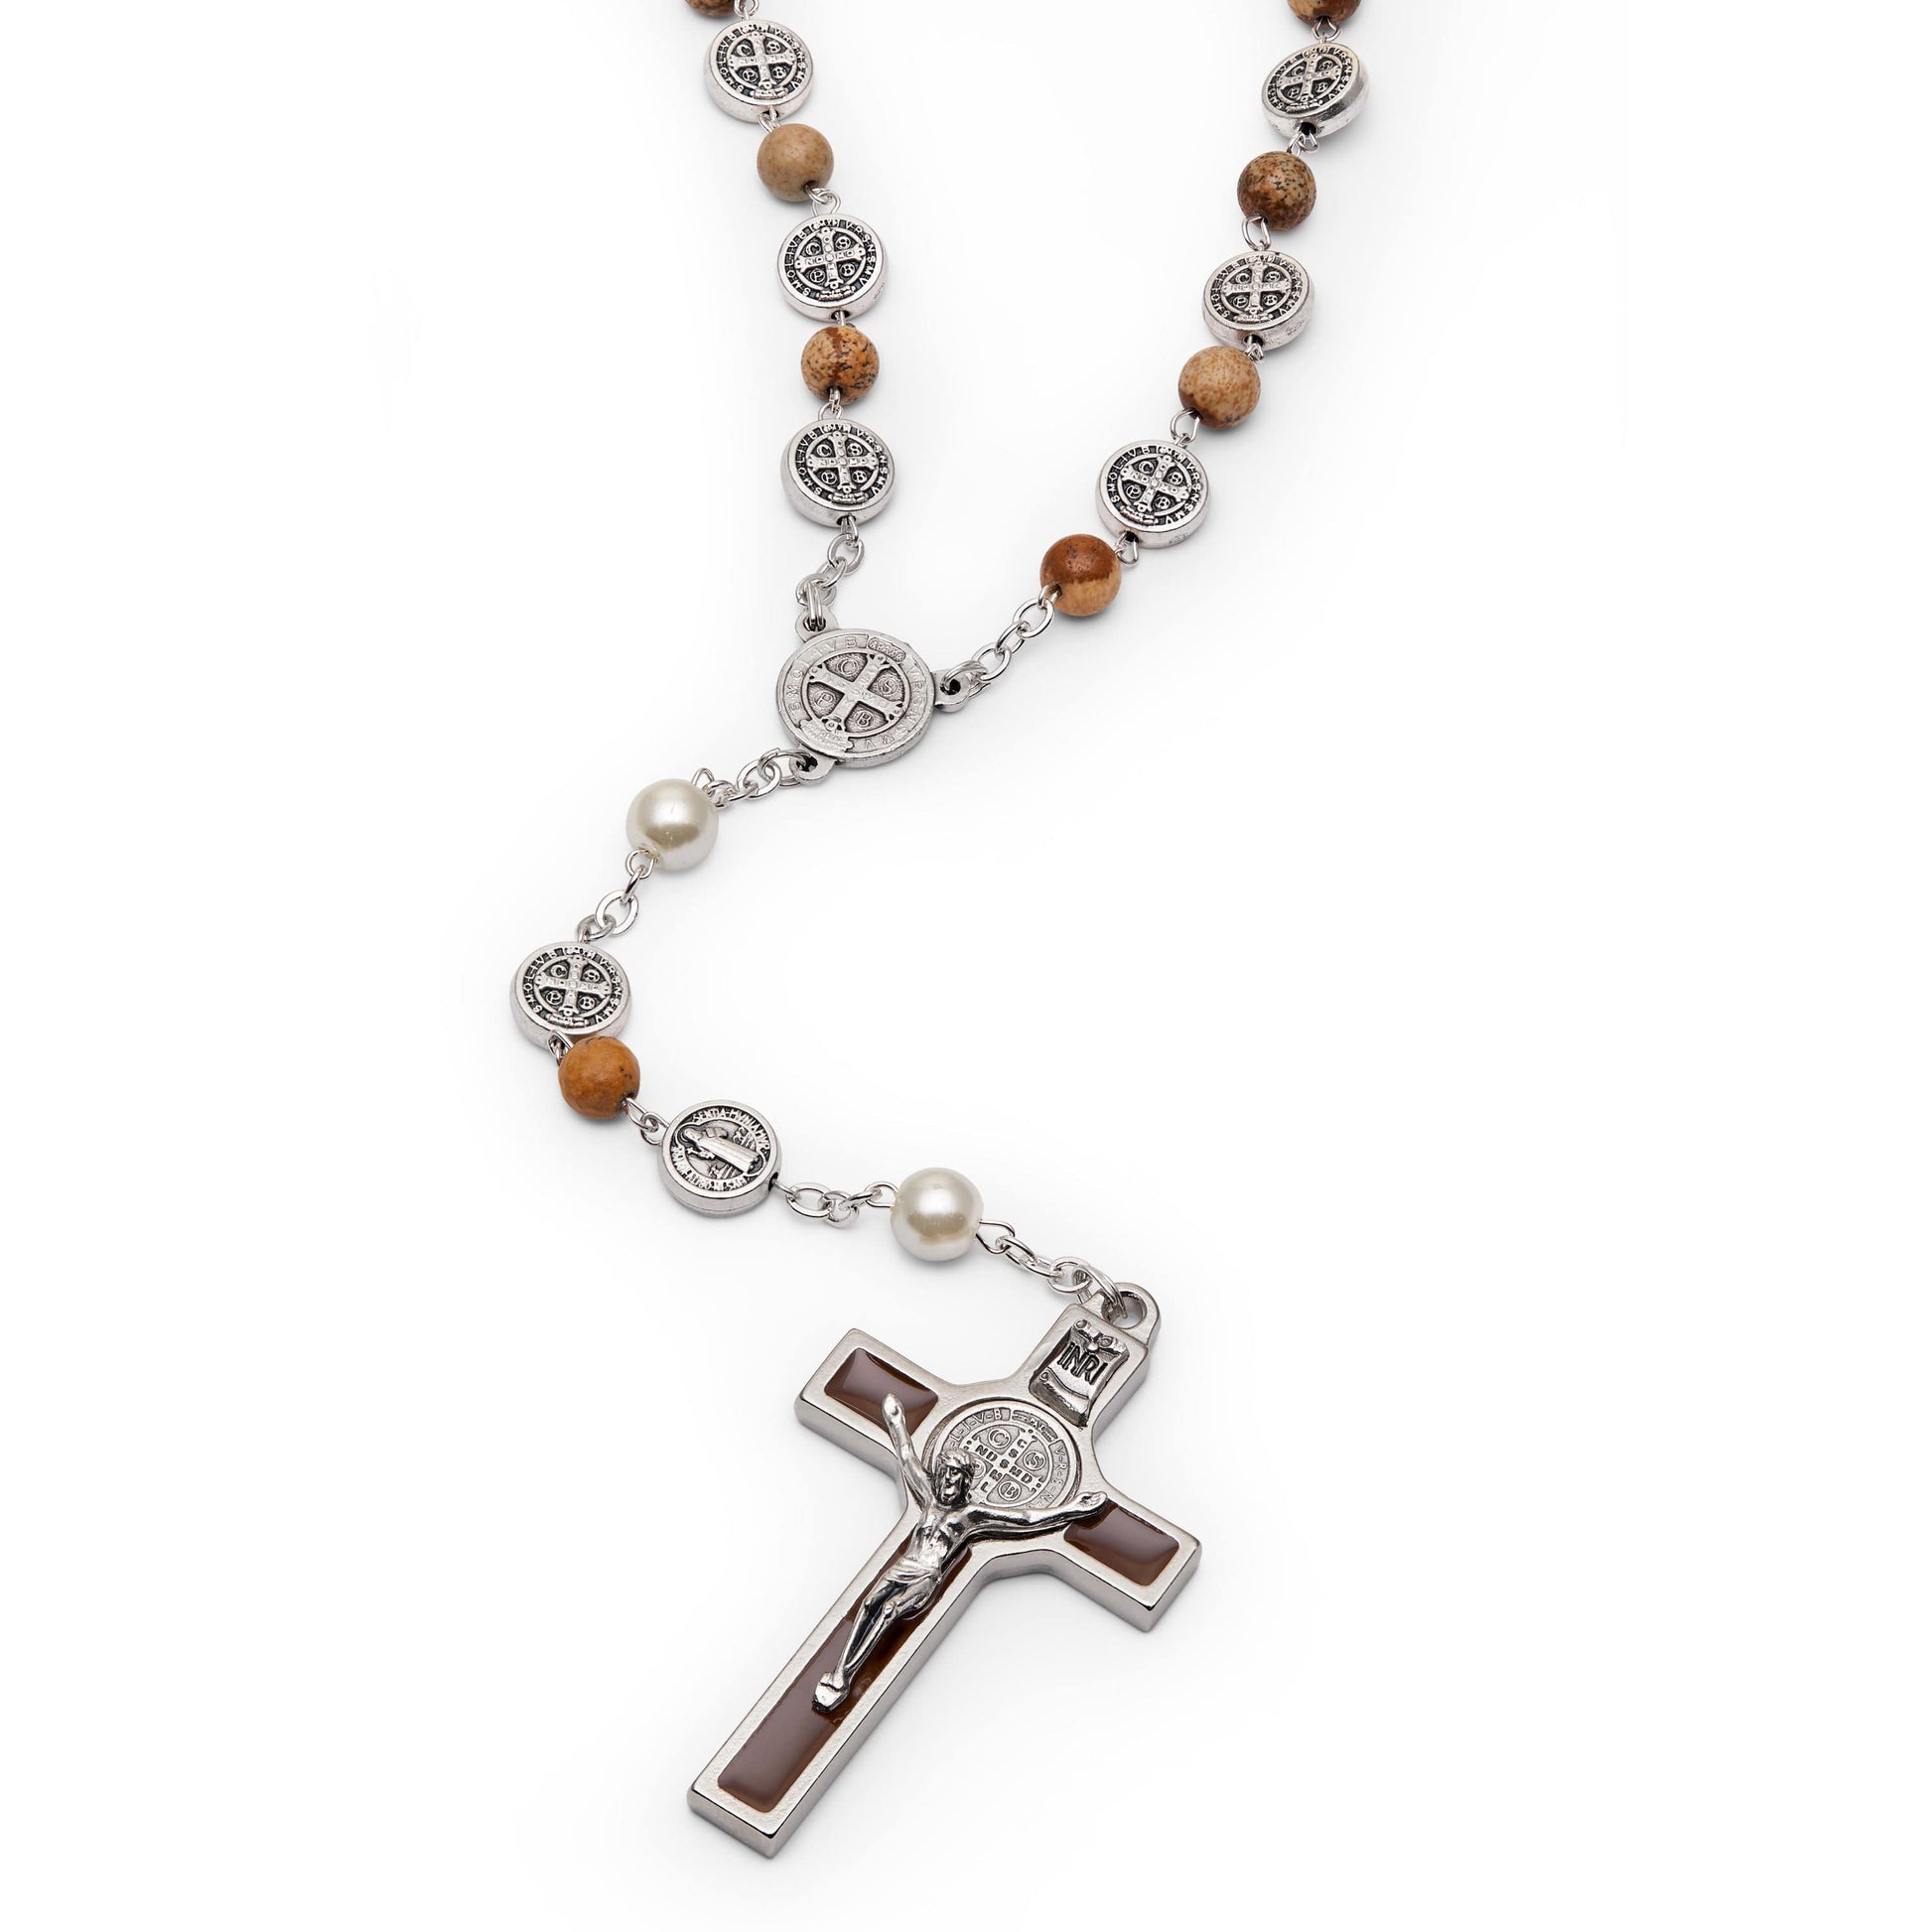 MONDO CATTOLICO Prayer Beads 53 cm (20.86 in) / 7 mm (0.27 in) St. Benedict Rosary in pearl glass our father beads